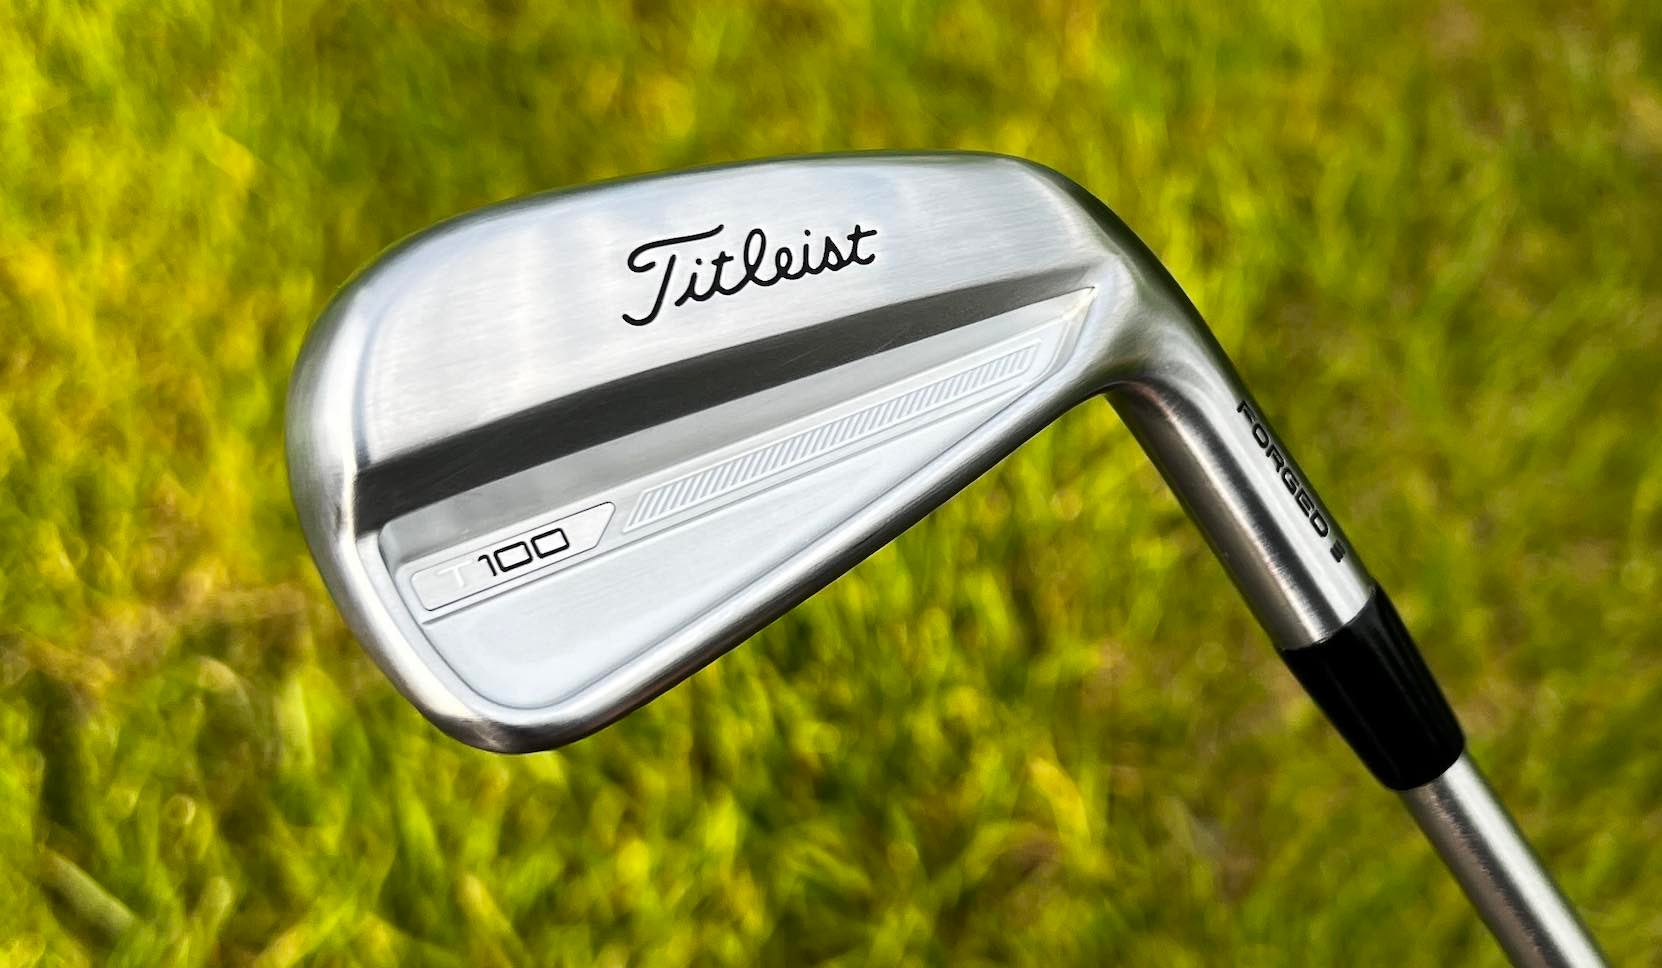 FIRST LOOK Titleist debuts highly anticipated new irons at Memorial